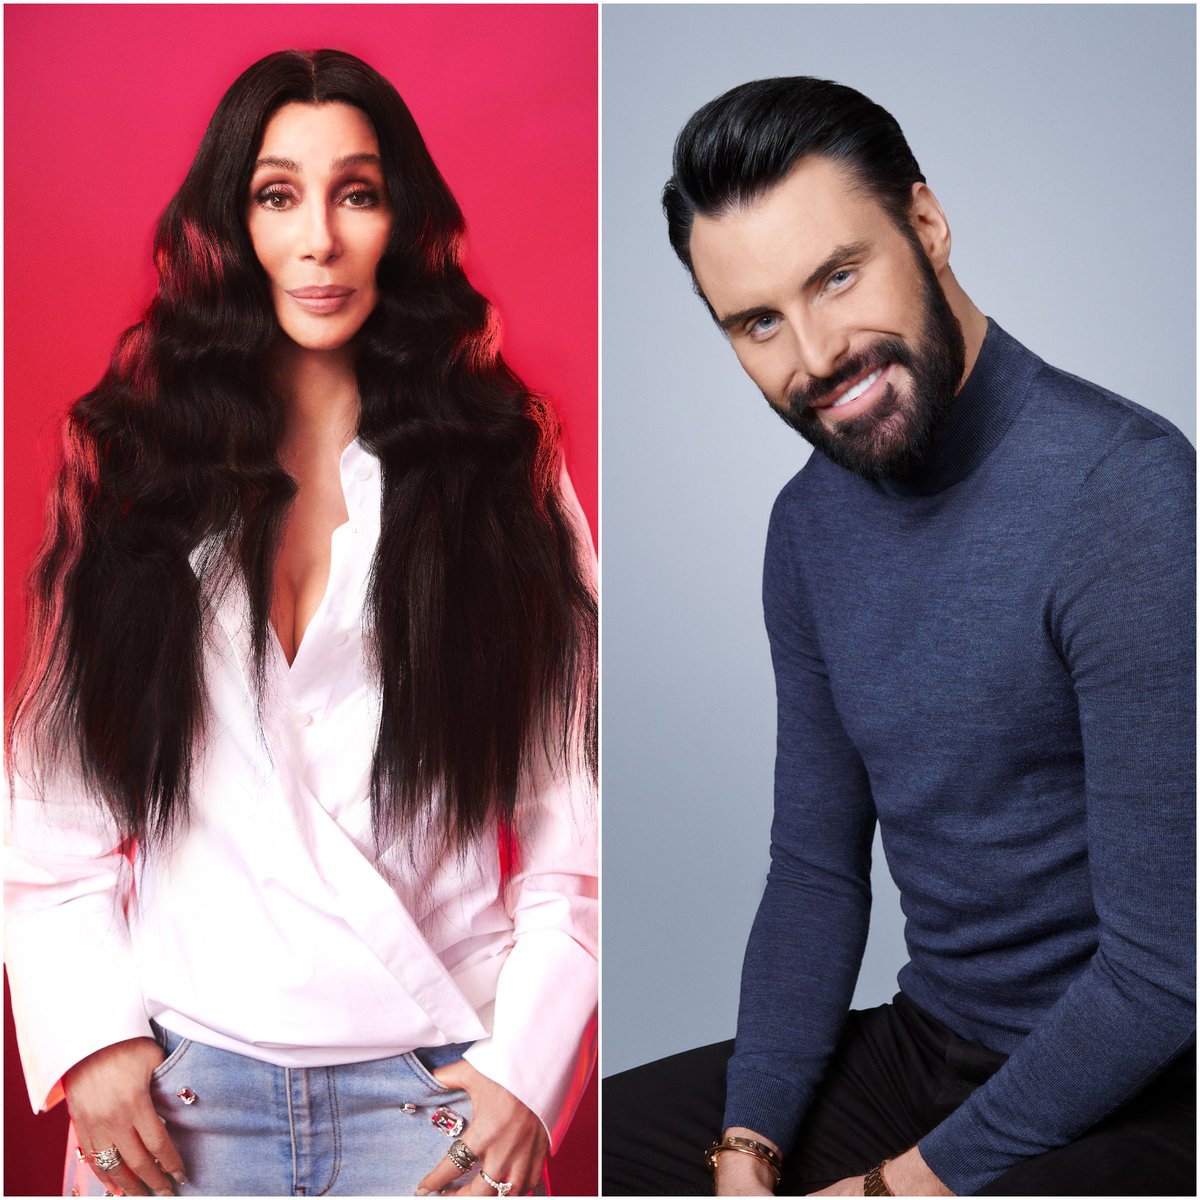 🎶 You'd better believe Cher Meets Rylan is coming to the @BBC! @BBCTwo and BBC Music are delivering a Christmas present to viewers as legendary singer and actress @cher joins Rylan in conversation in a world exclusive 60-minute special More info ➡️ bbc.in/3MQb155